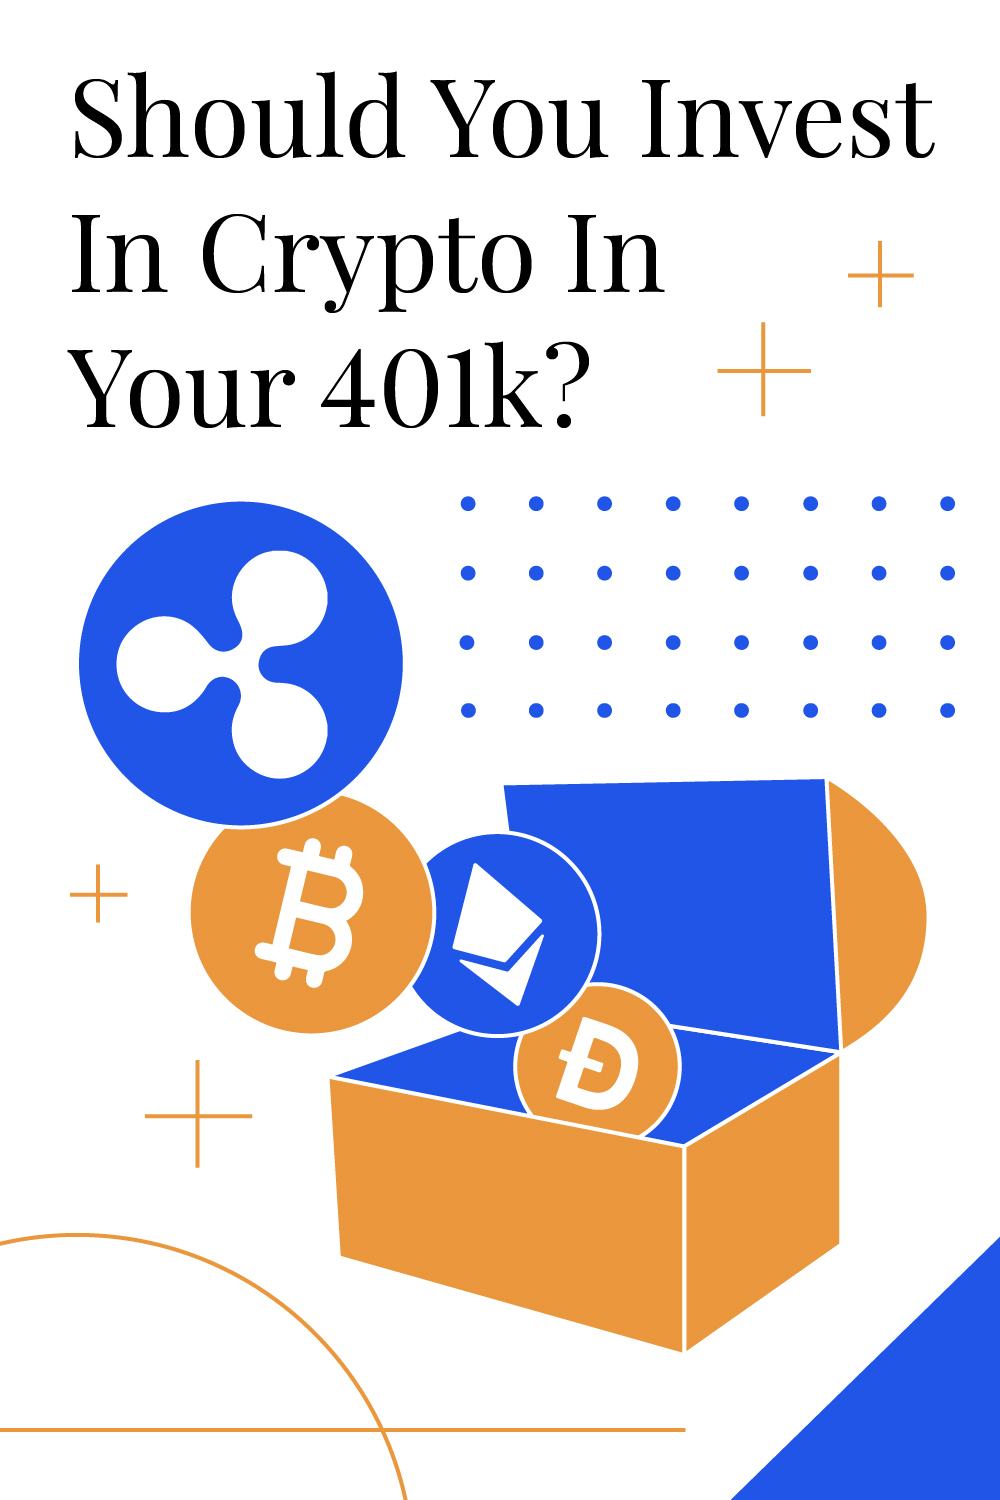 Should You Invest In Crypto In Your 401k?